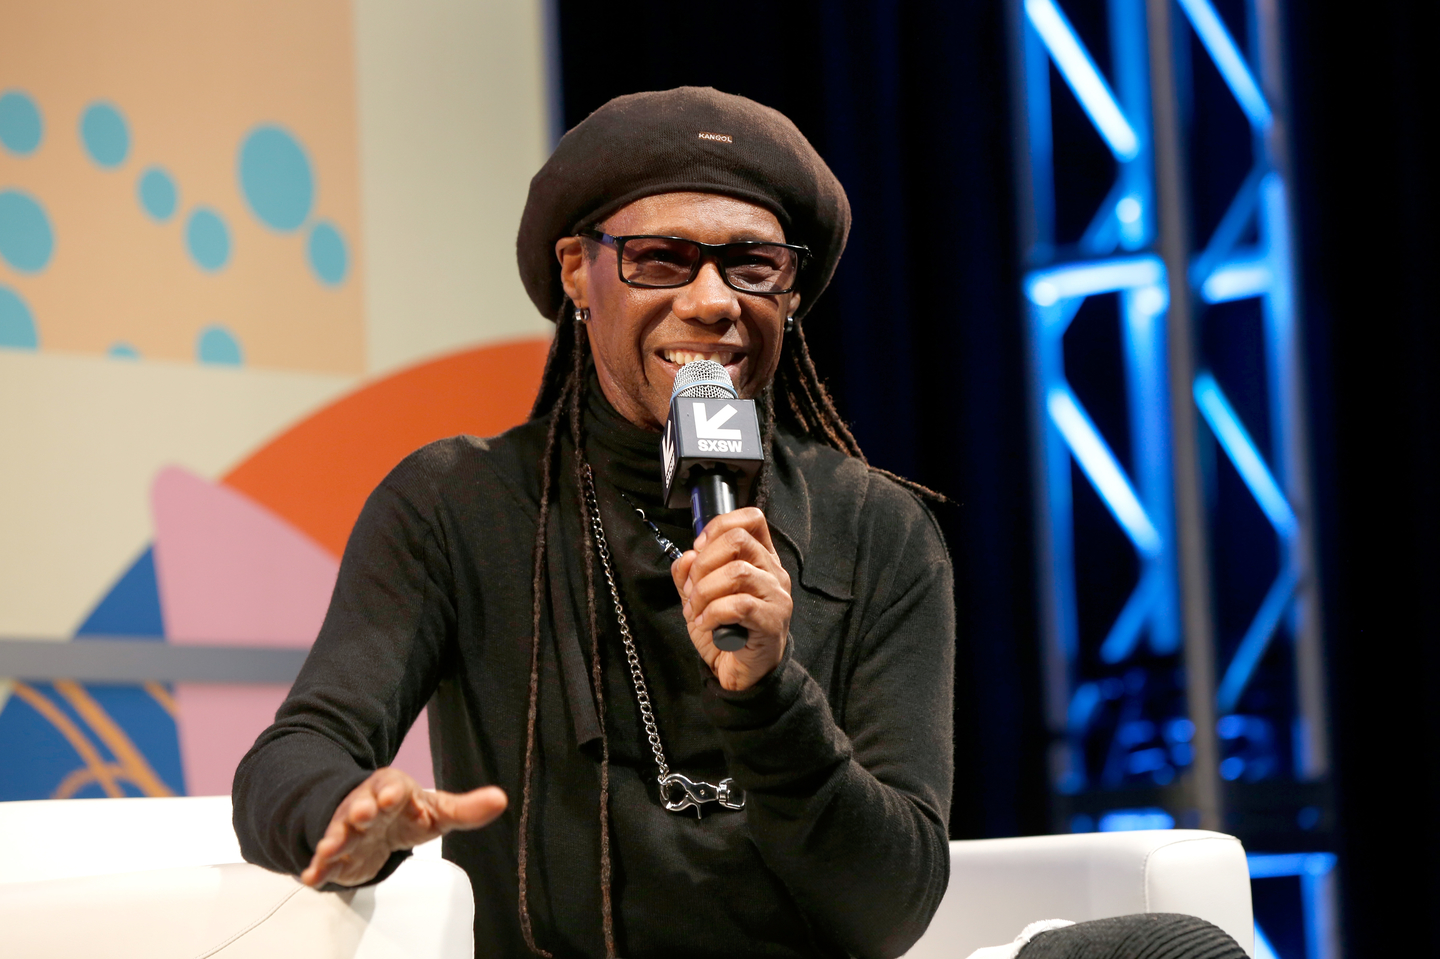 Nile Rodgers shared his wisdom during “Music Business 101 - A Q&A with Legendary Music Icon Nile Rodgers.” Photo by Sean Mathis/Getty Images for SXSW